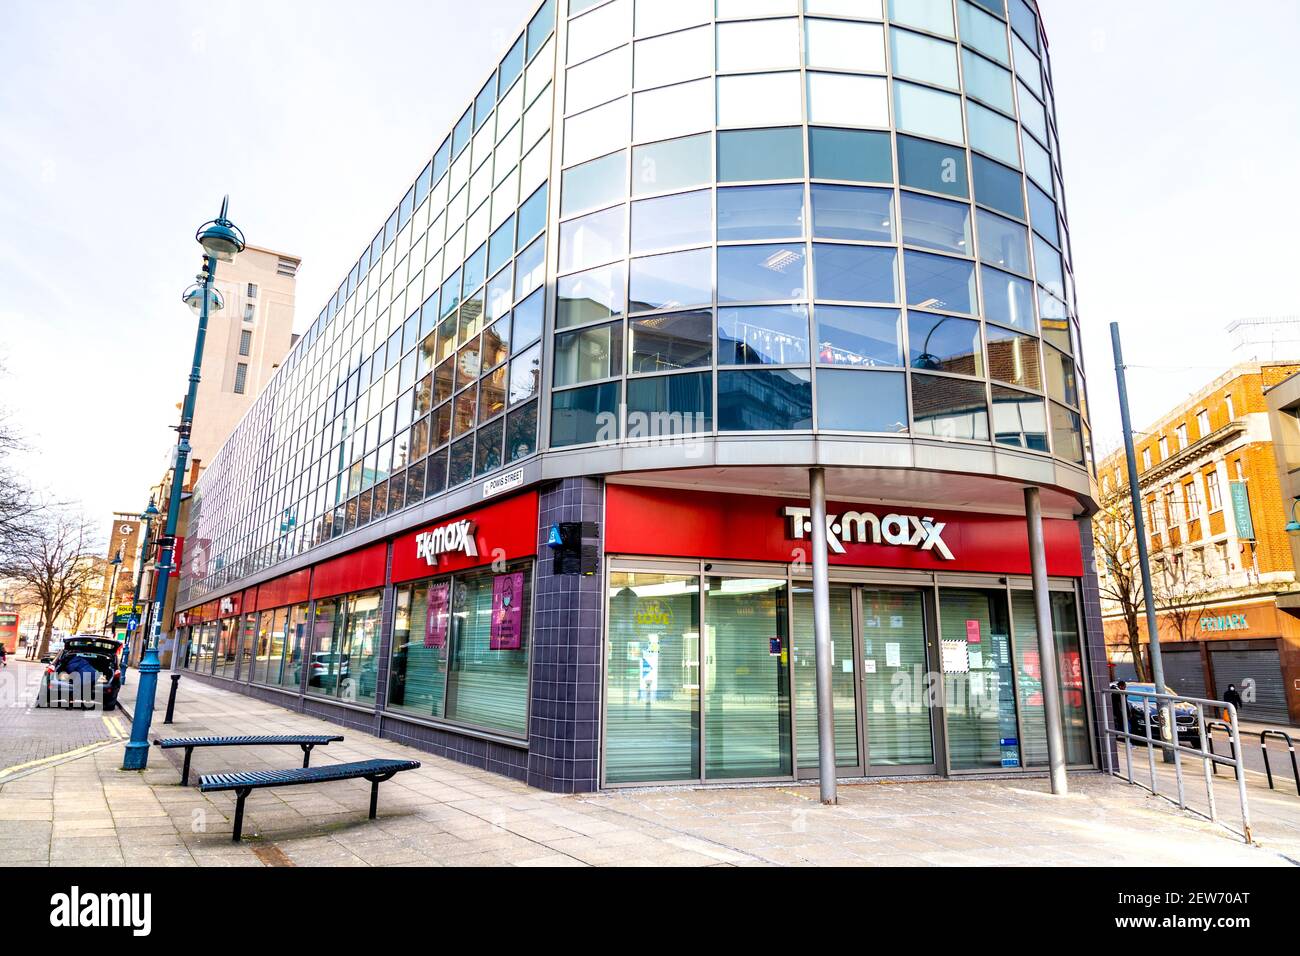 13 February 2021 London, UK - Exterior of closed TK Maxx store in Woolwich during the coronavirues pandemic lockdown Stock Photo